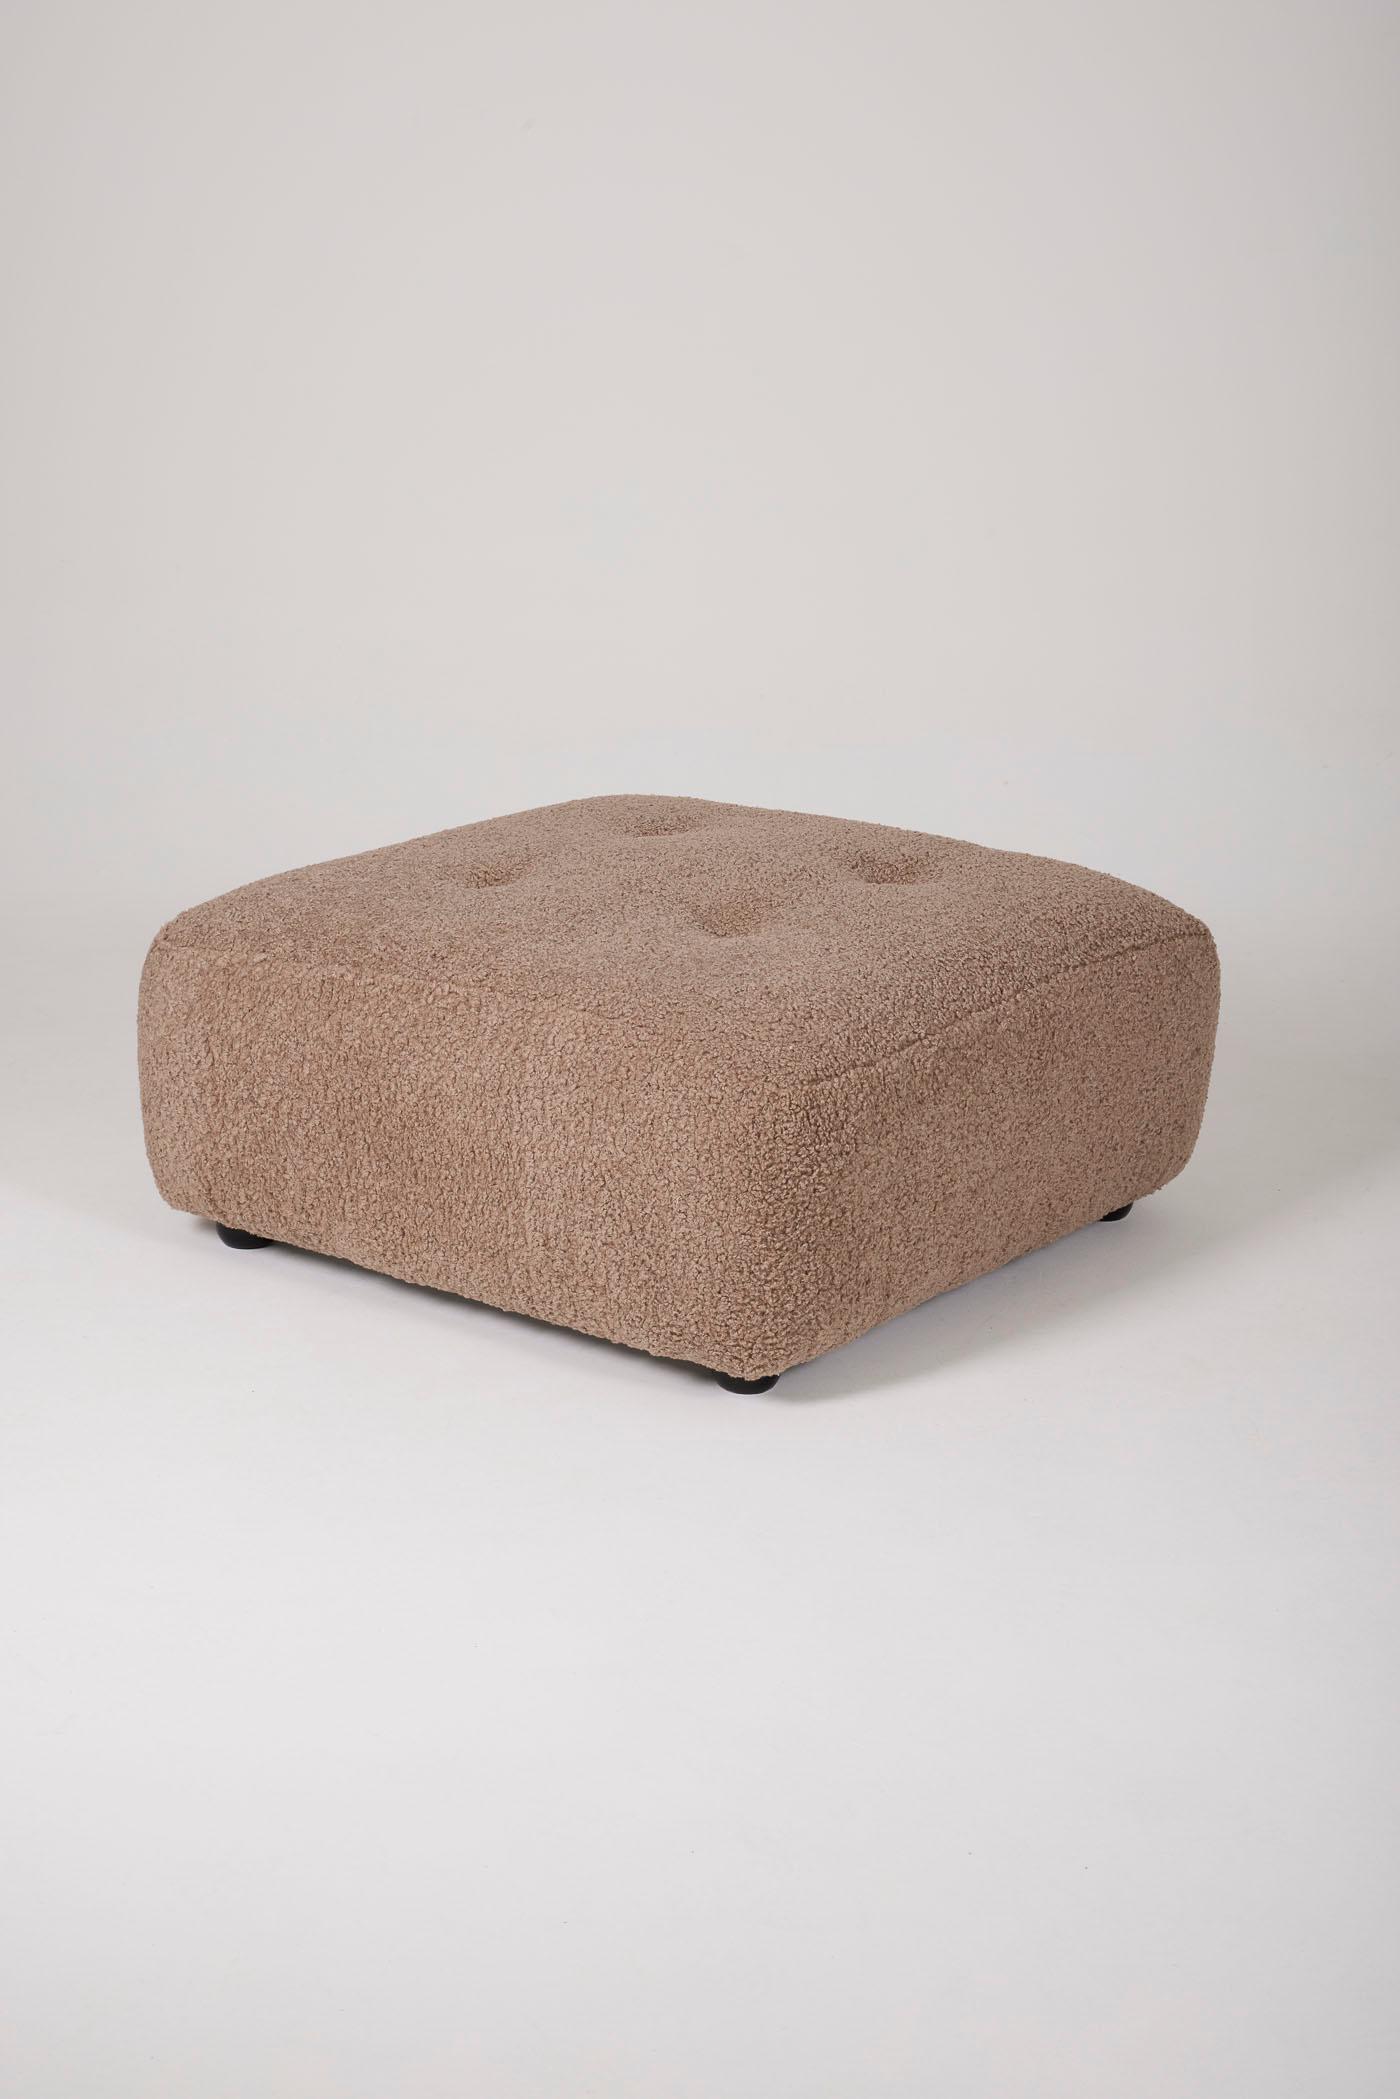 An upholstered brown bouclé end table or ottoman. Ideal for providing additional seating in a living room or bedroom. In perfect condition.
DV466